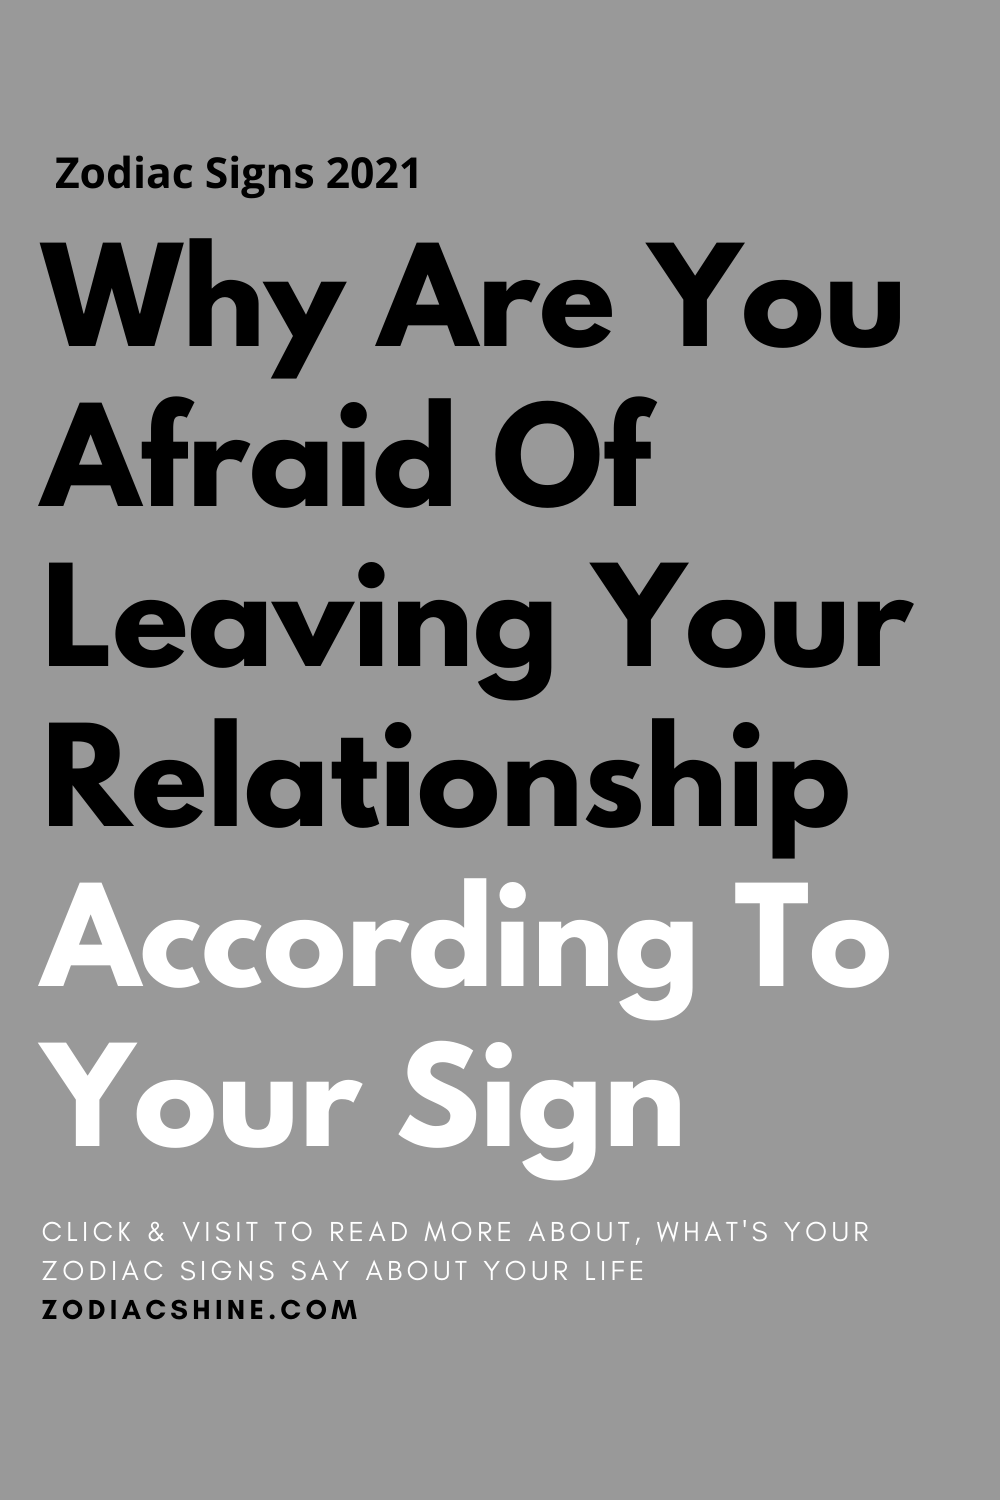 Why Are You Afraid Of Leaving Your Relationship According To Your Sign